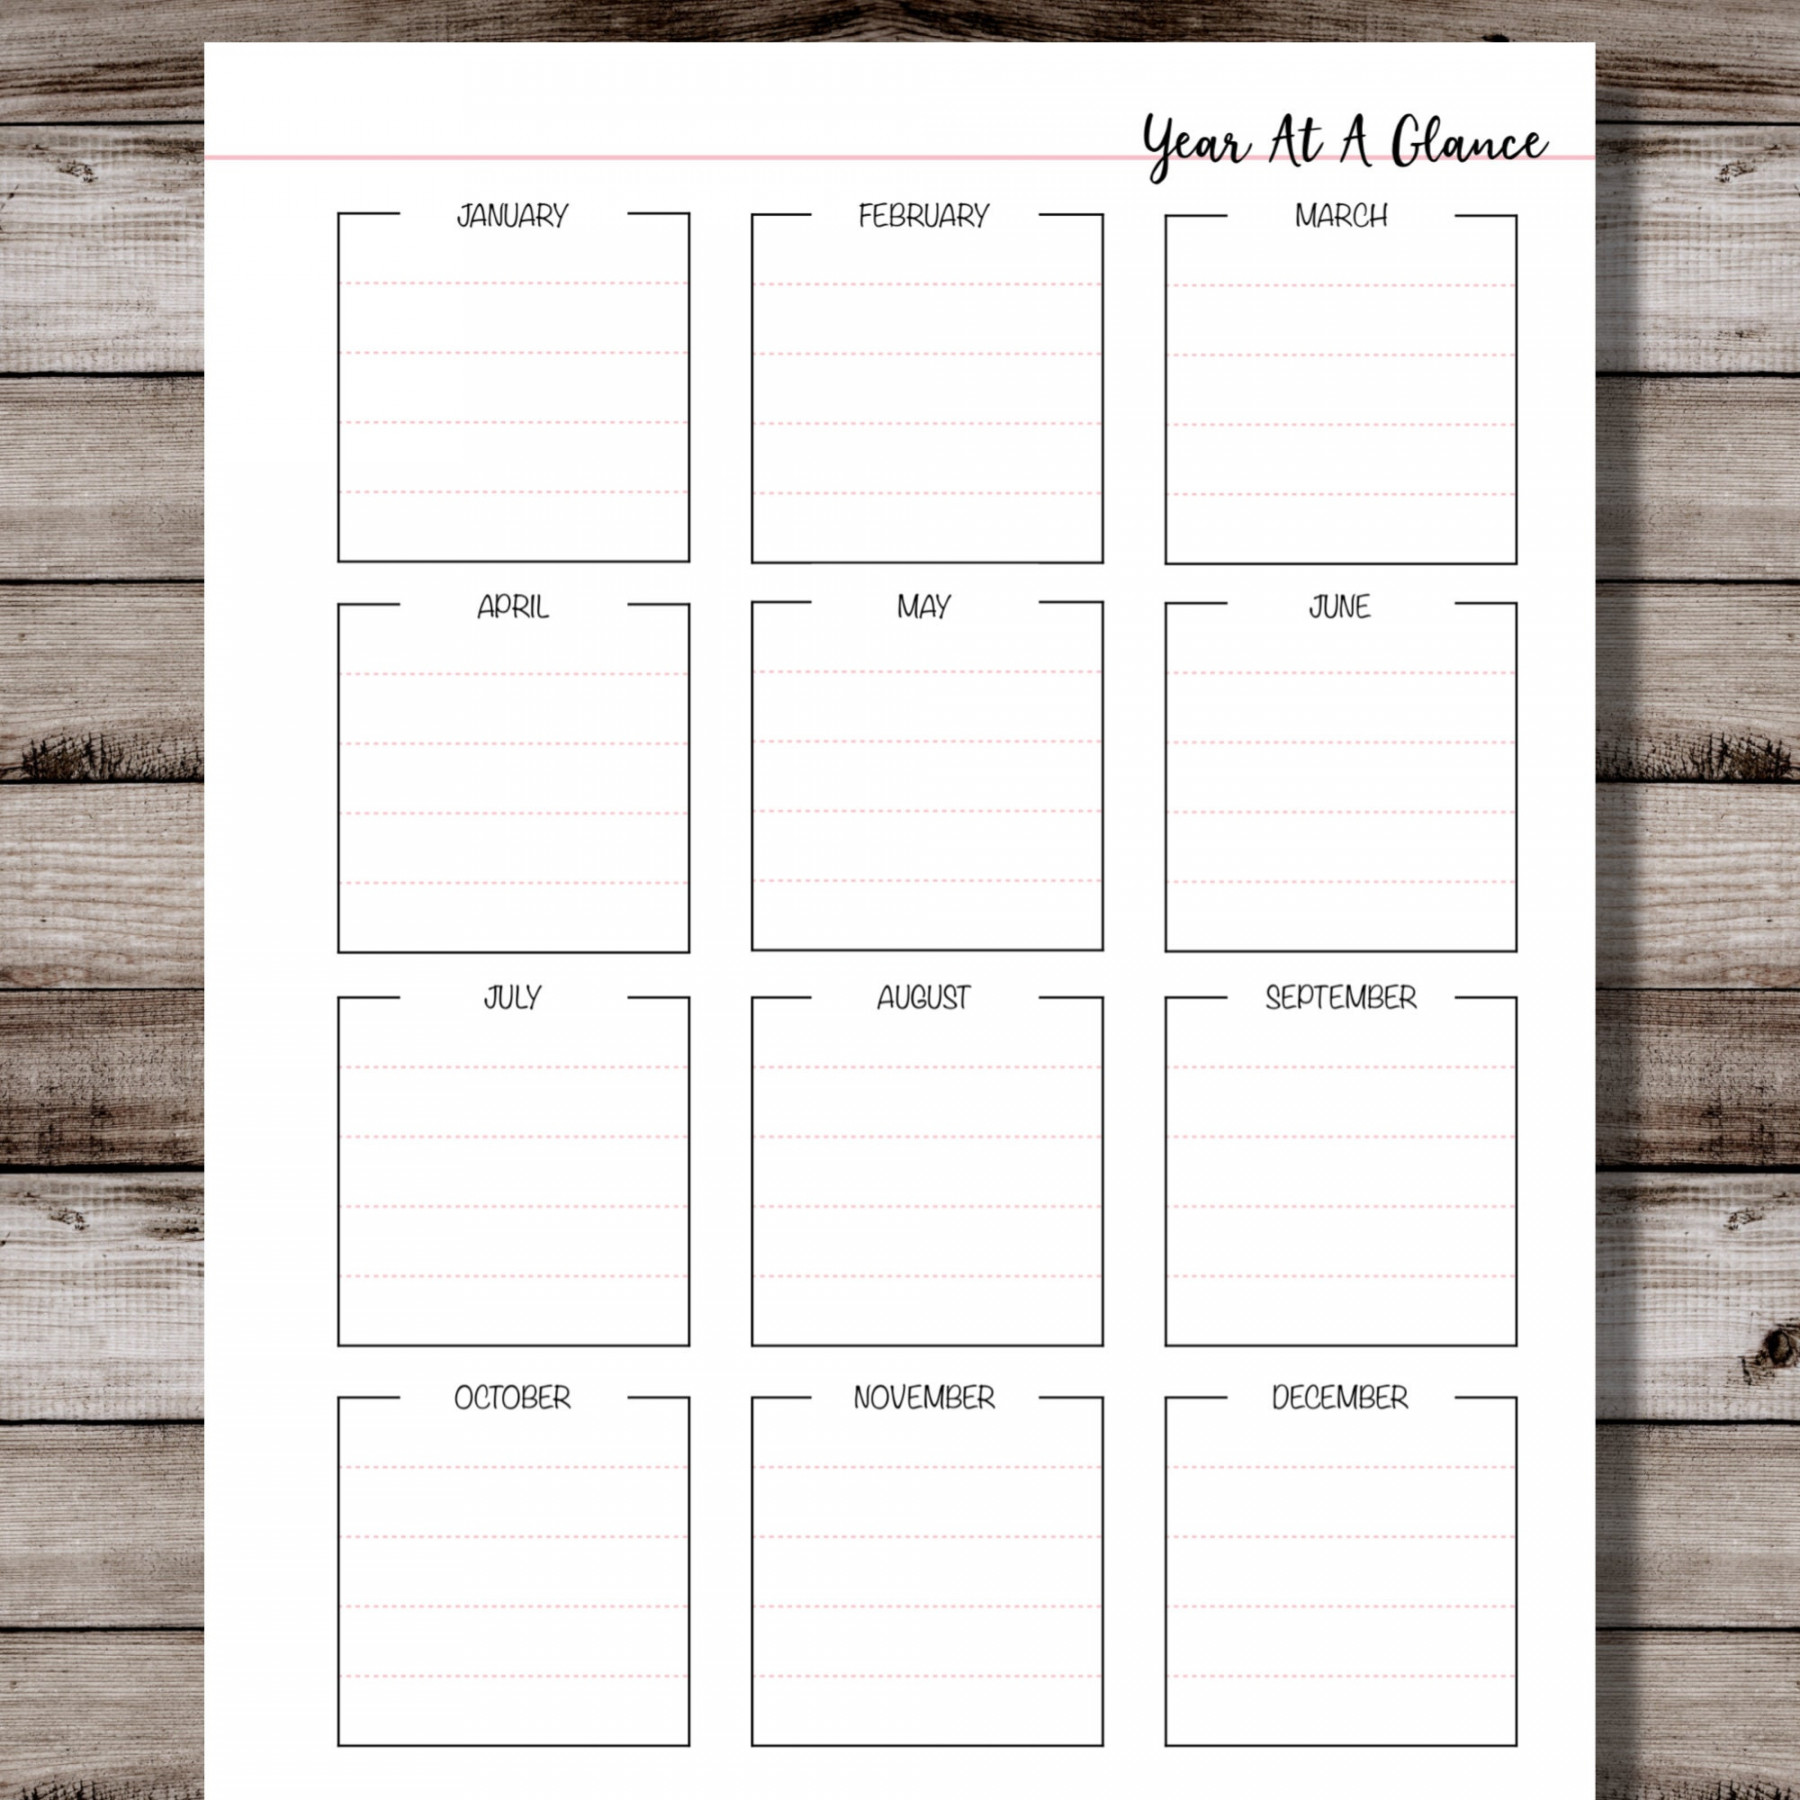 Year At A Glance Planner Printable